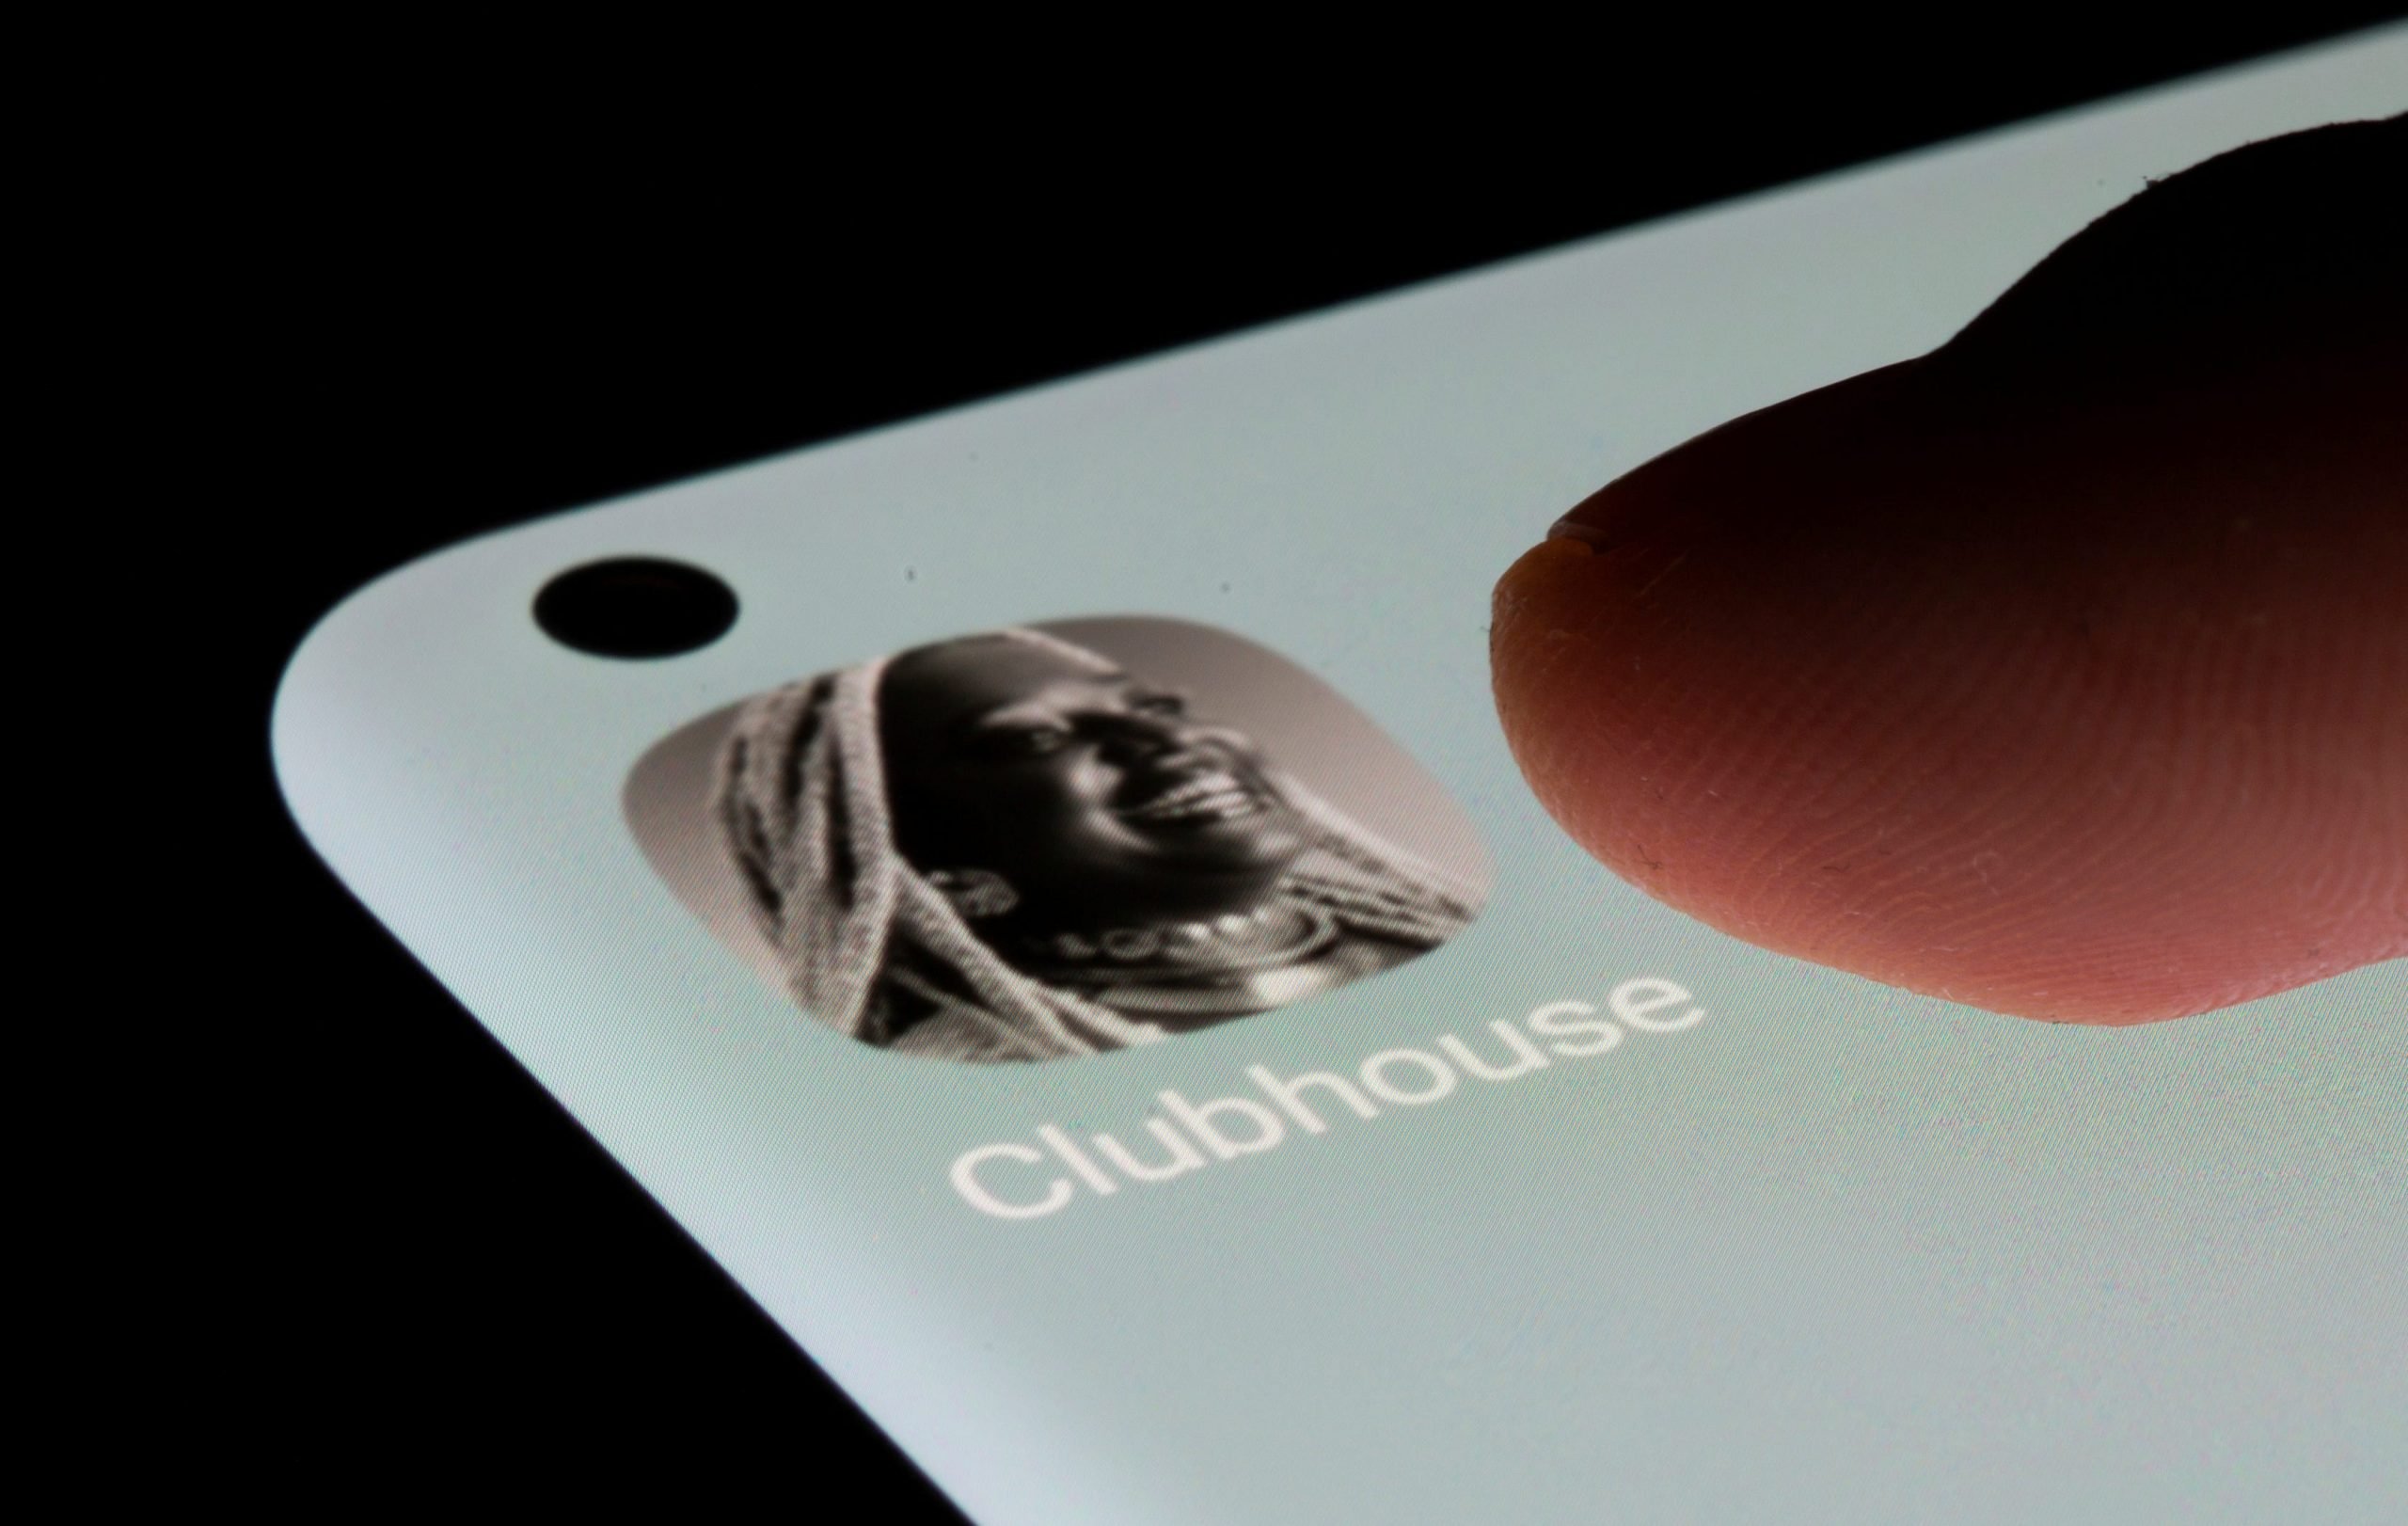 A finger taps the Clubhouse app icon on a bright iPhone screen